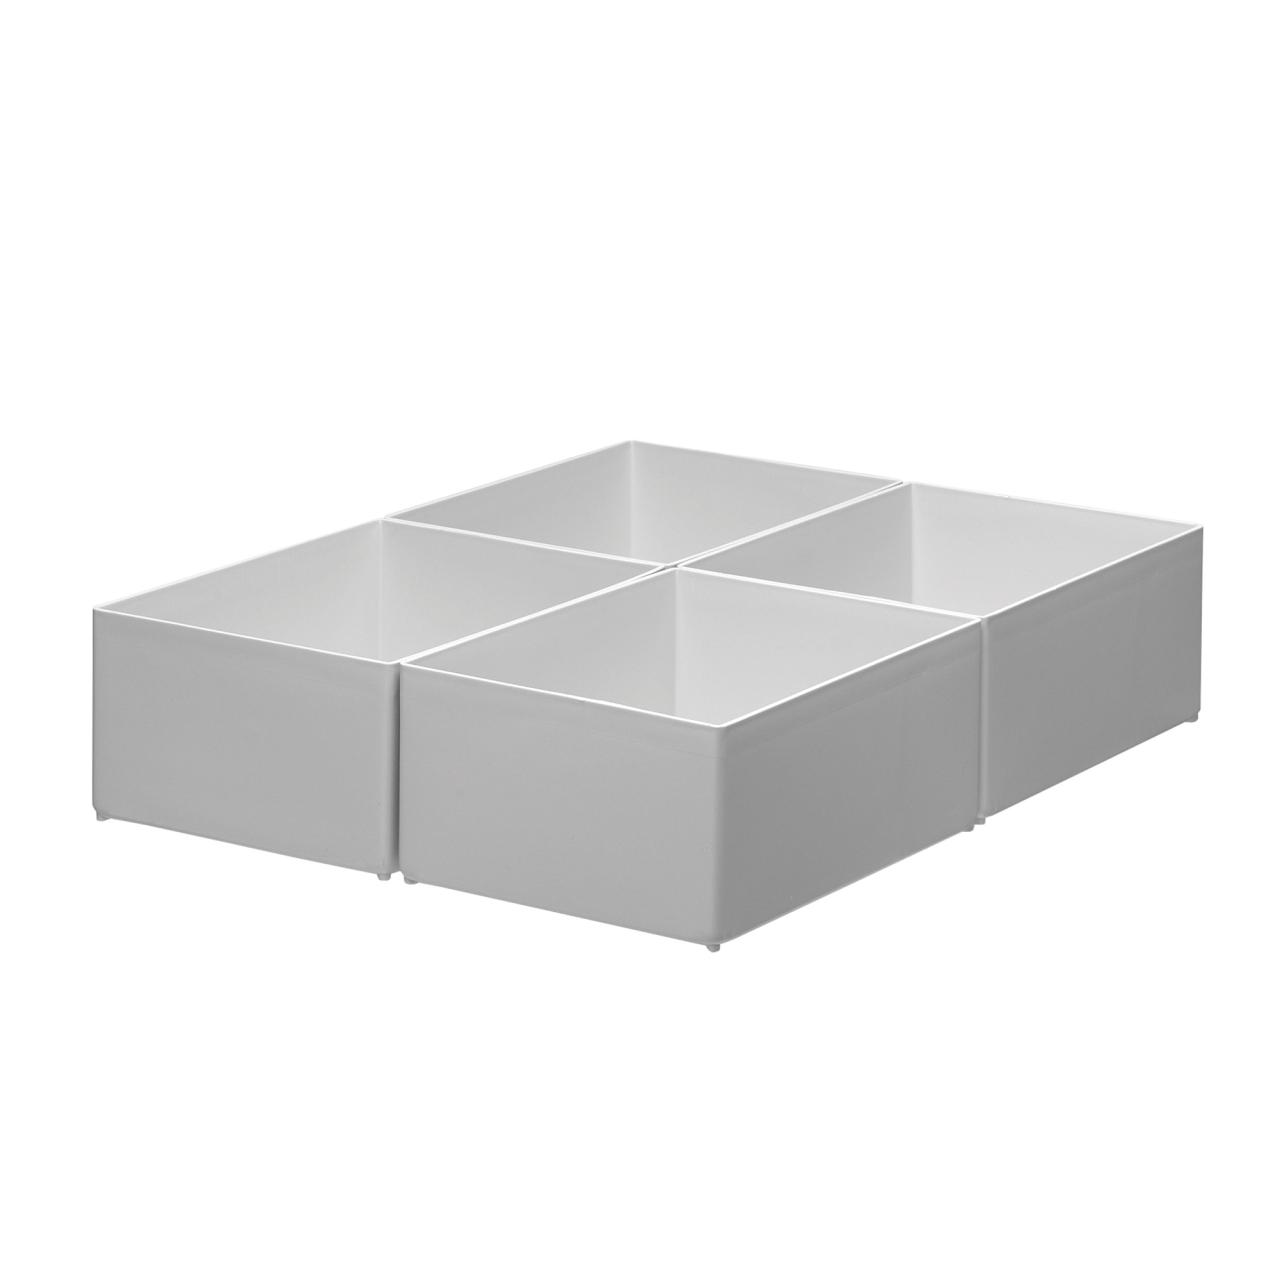 Insert Boxes, high, 4 boxes per drawer, 1 compartment